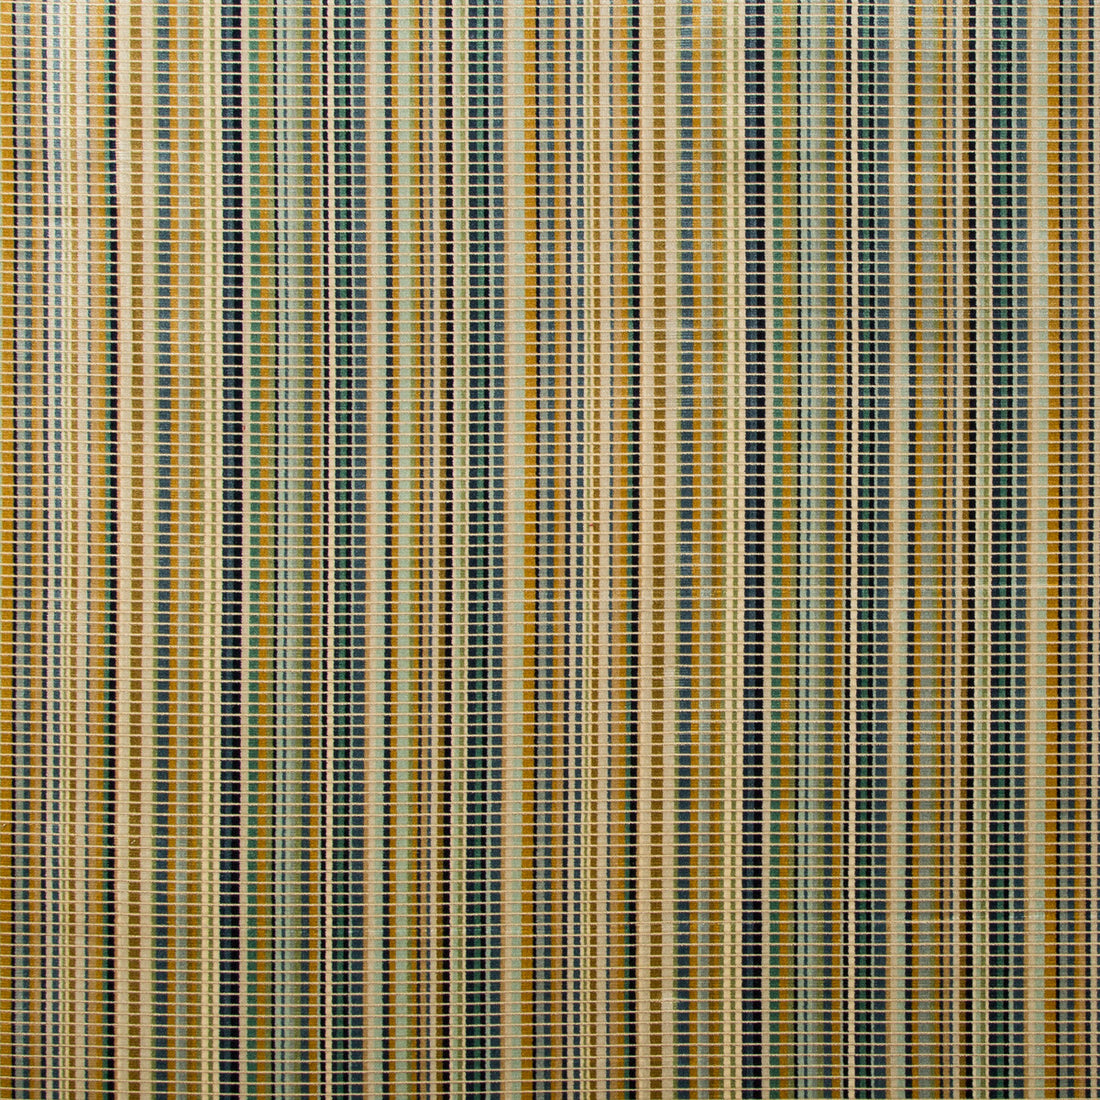 Burton Velvet fabric in gold/teal color - pattern 2019113.345.0 - by Lee Jofa in the Manor House collection